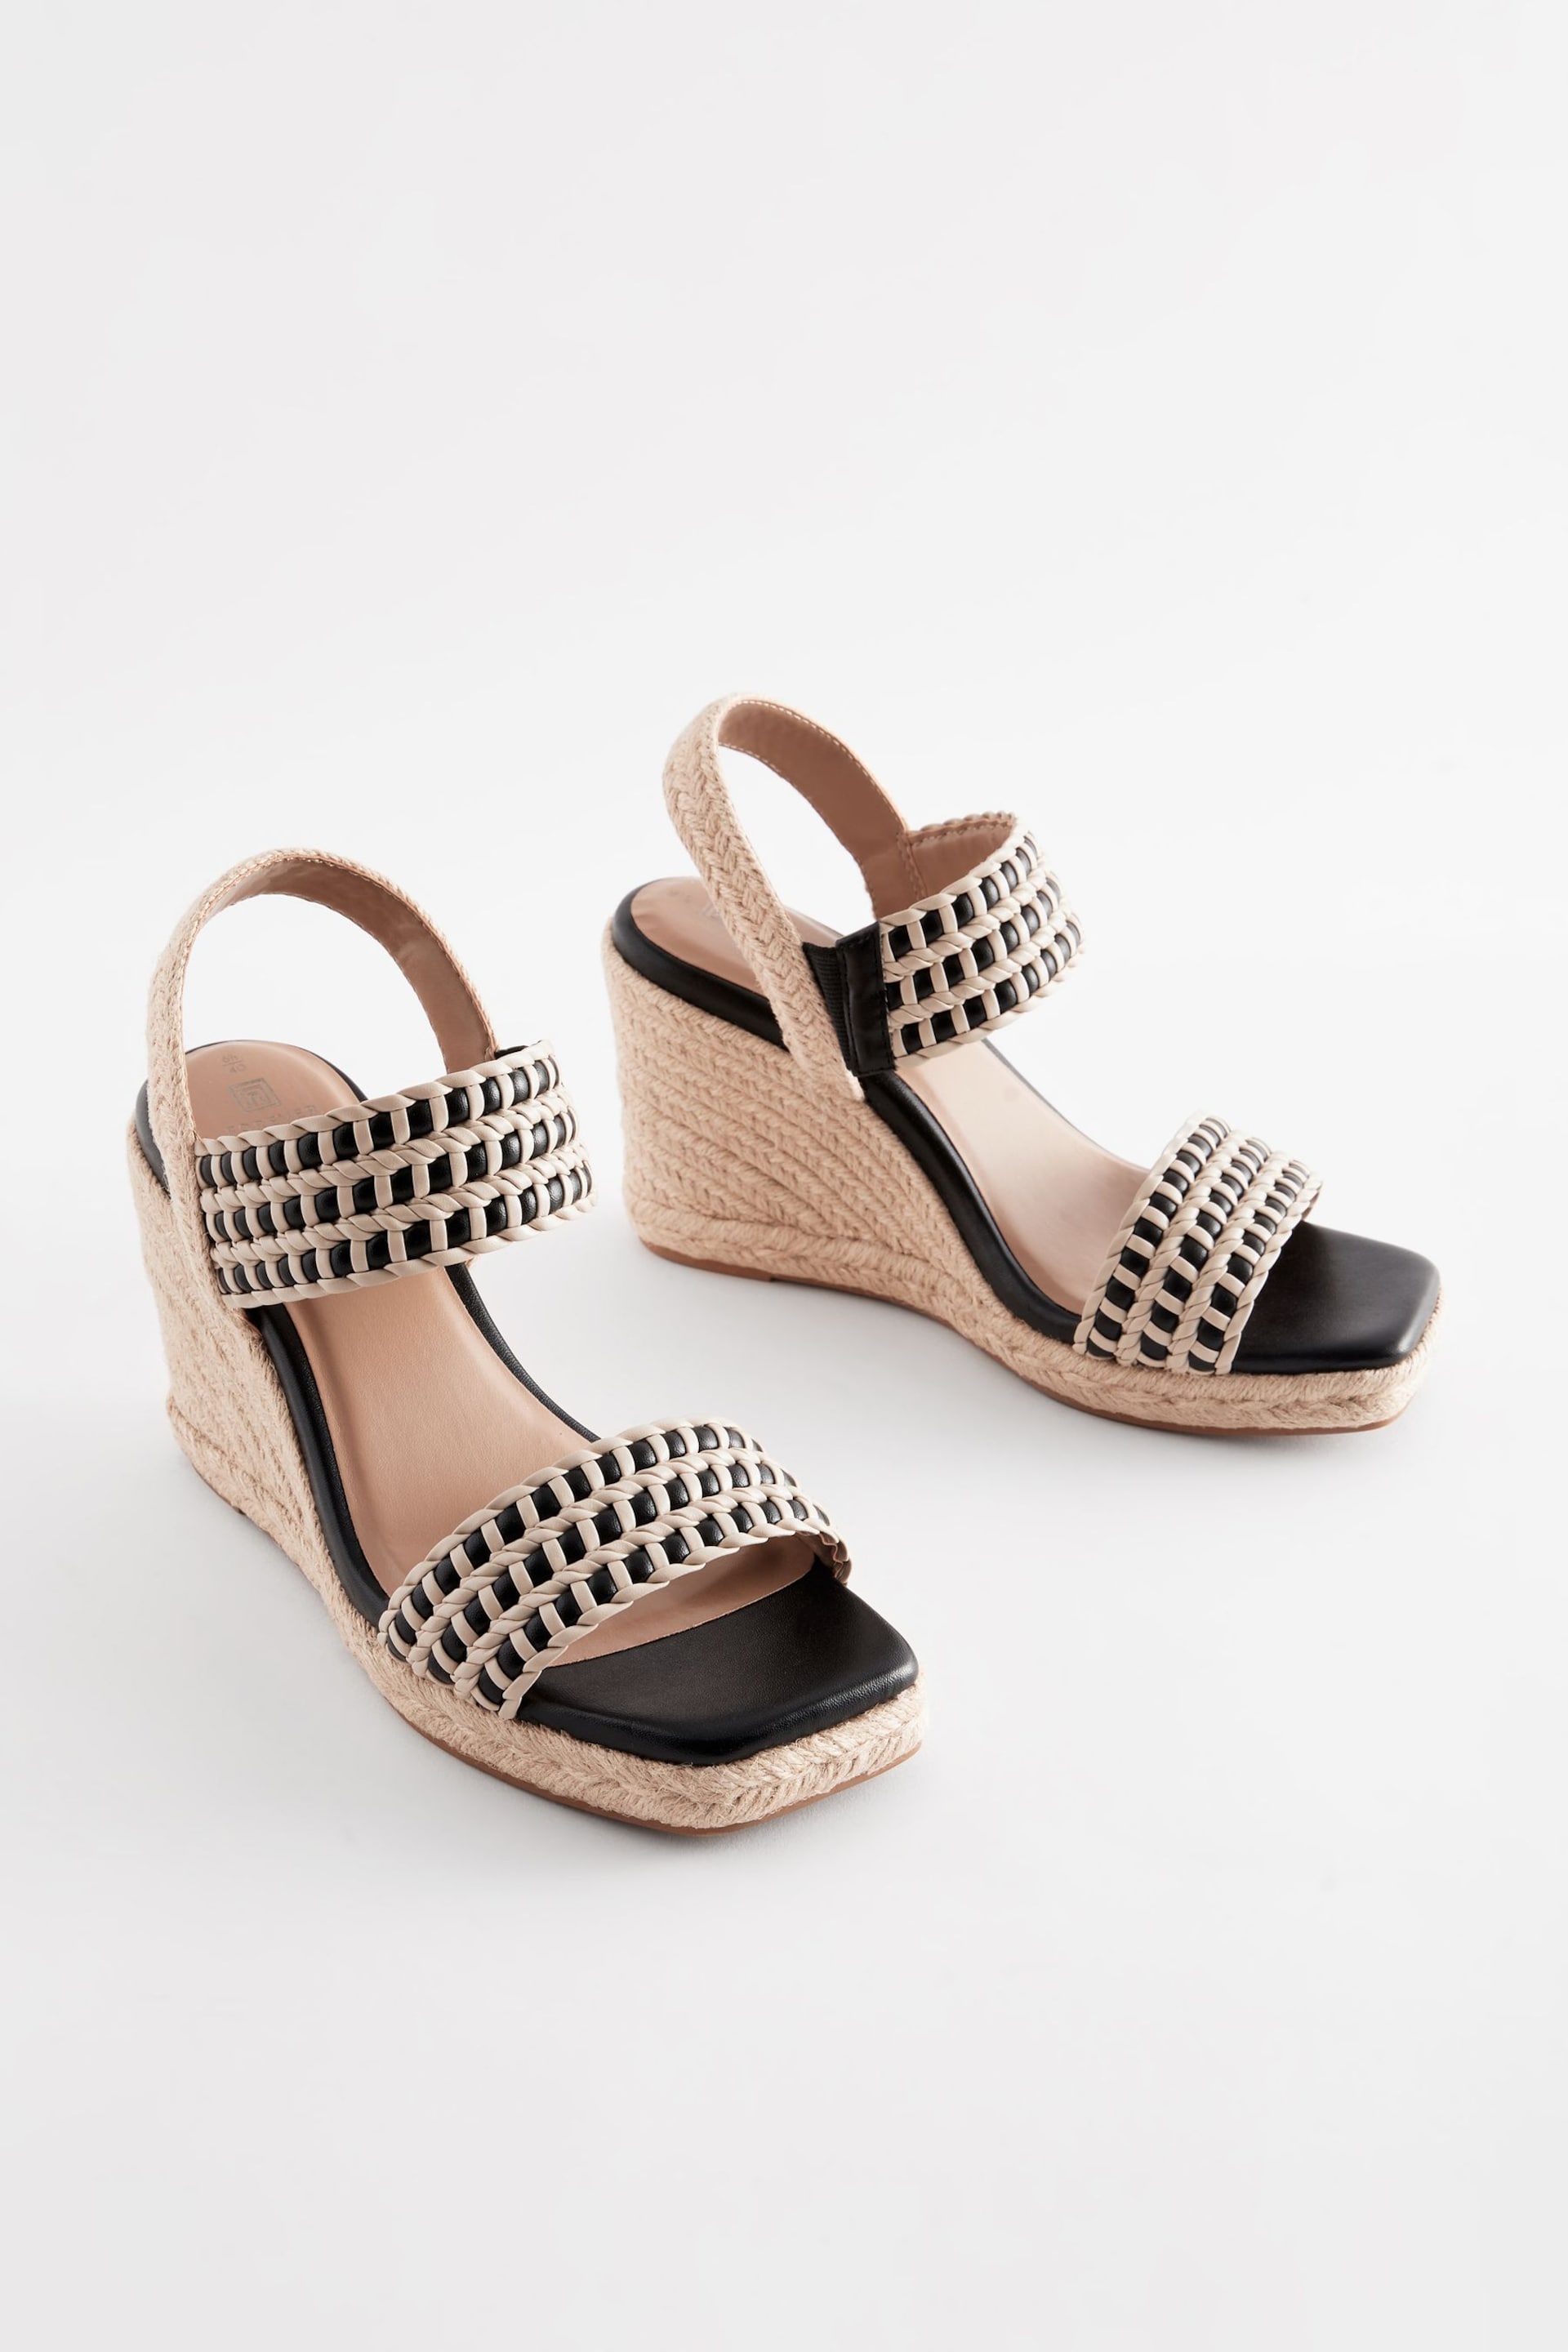 Monochrome Forever Comfort® Square Toe Weave Wedges - Image 3 of 8